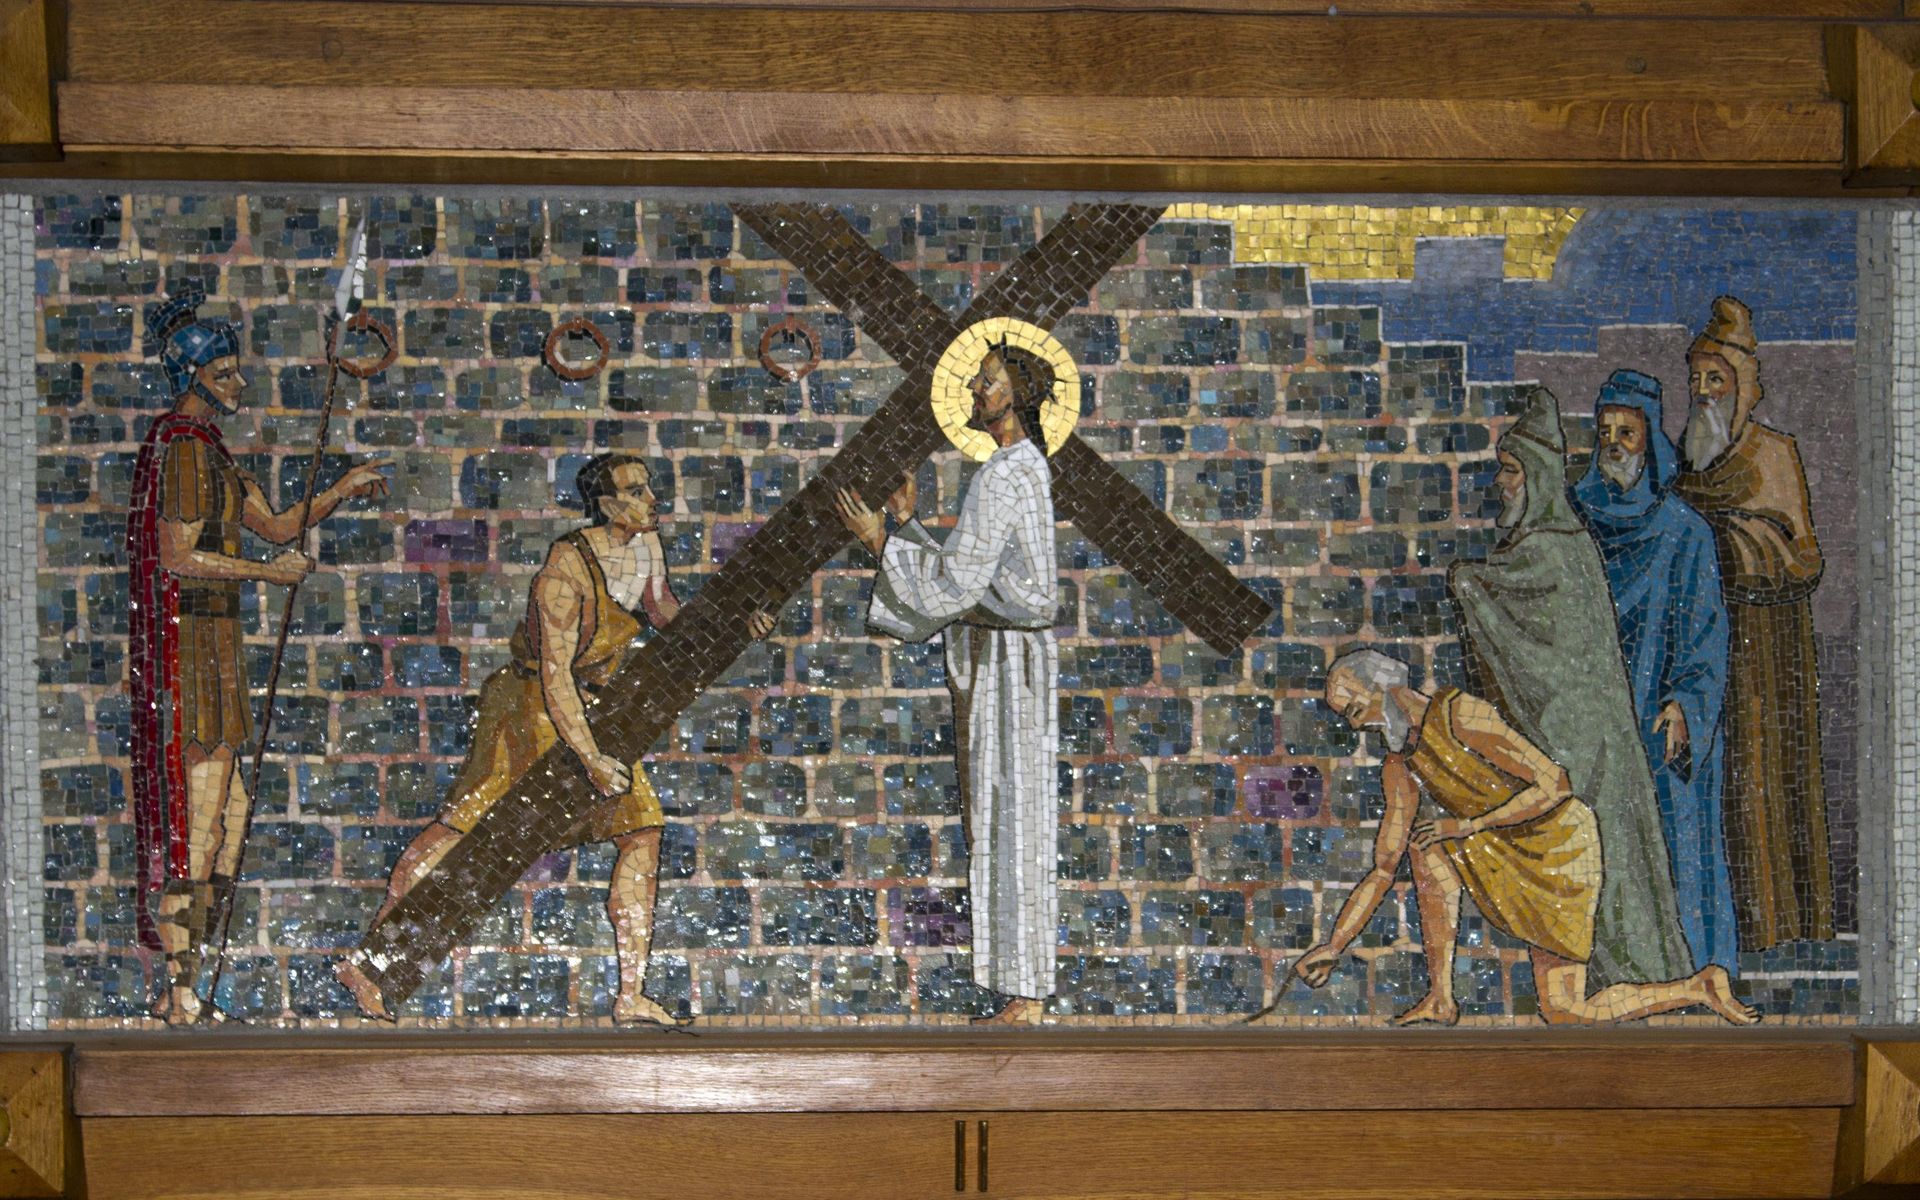 A painting of jesus carrying a cross in front of a brick wall.